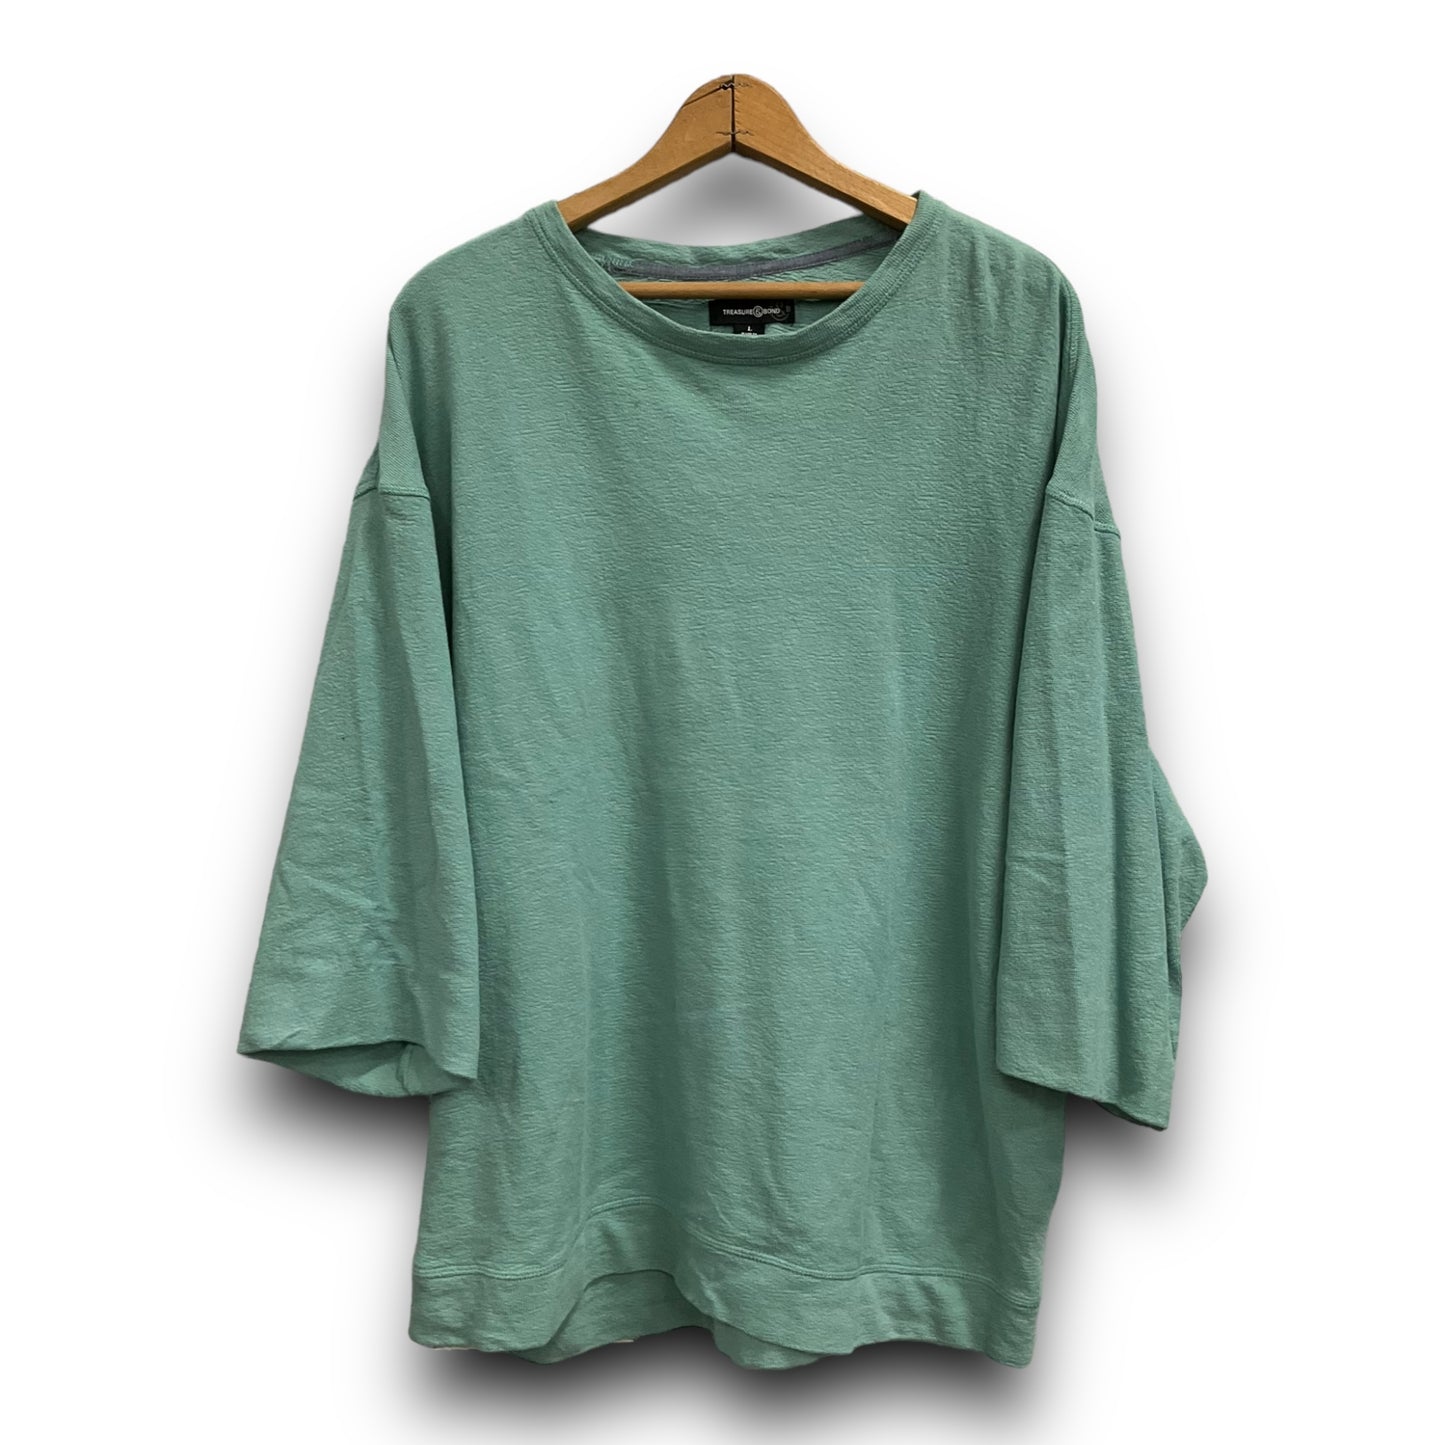 Top Long Sleeve Basic By Treasure And Bond  Size: L